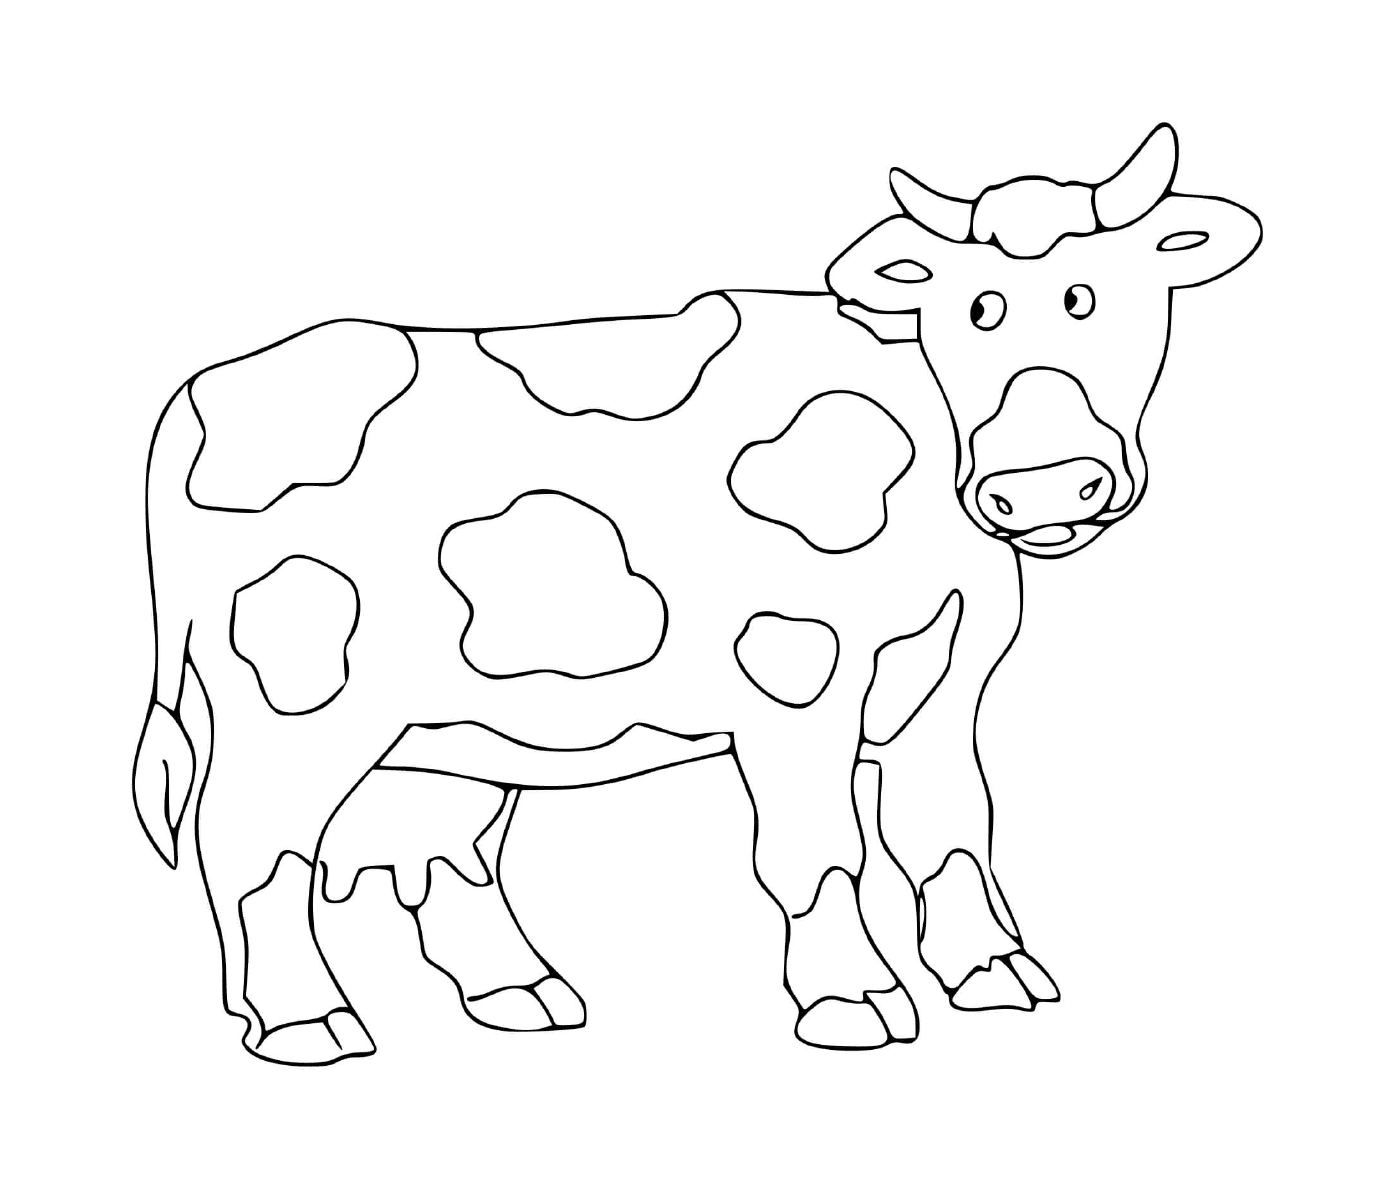  A peaceful and charming cow 